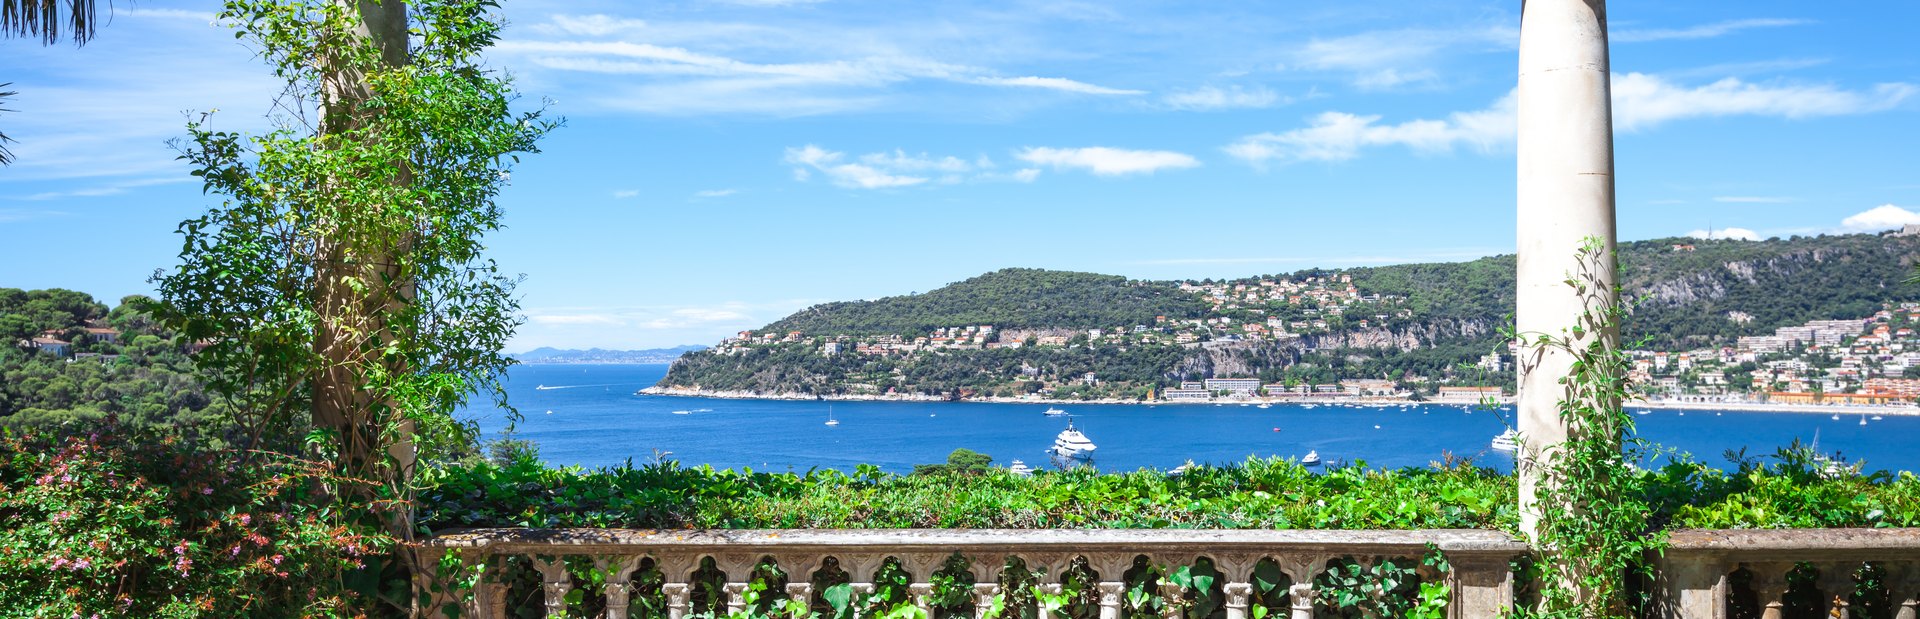 The culture of the Cote d'Azur: the best places to visit in the South of France